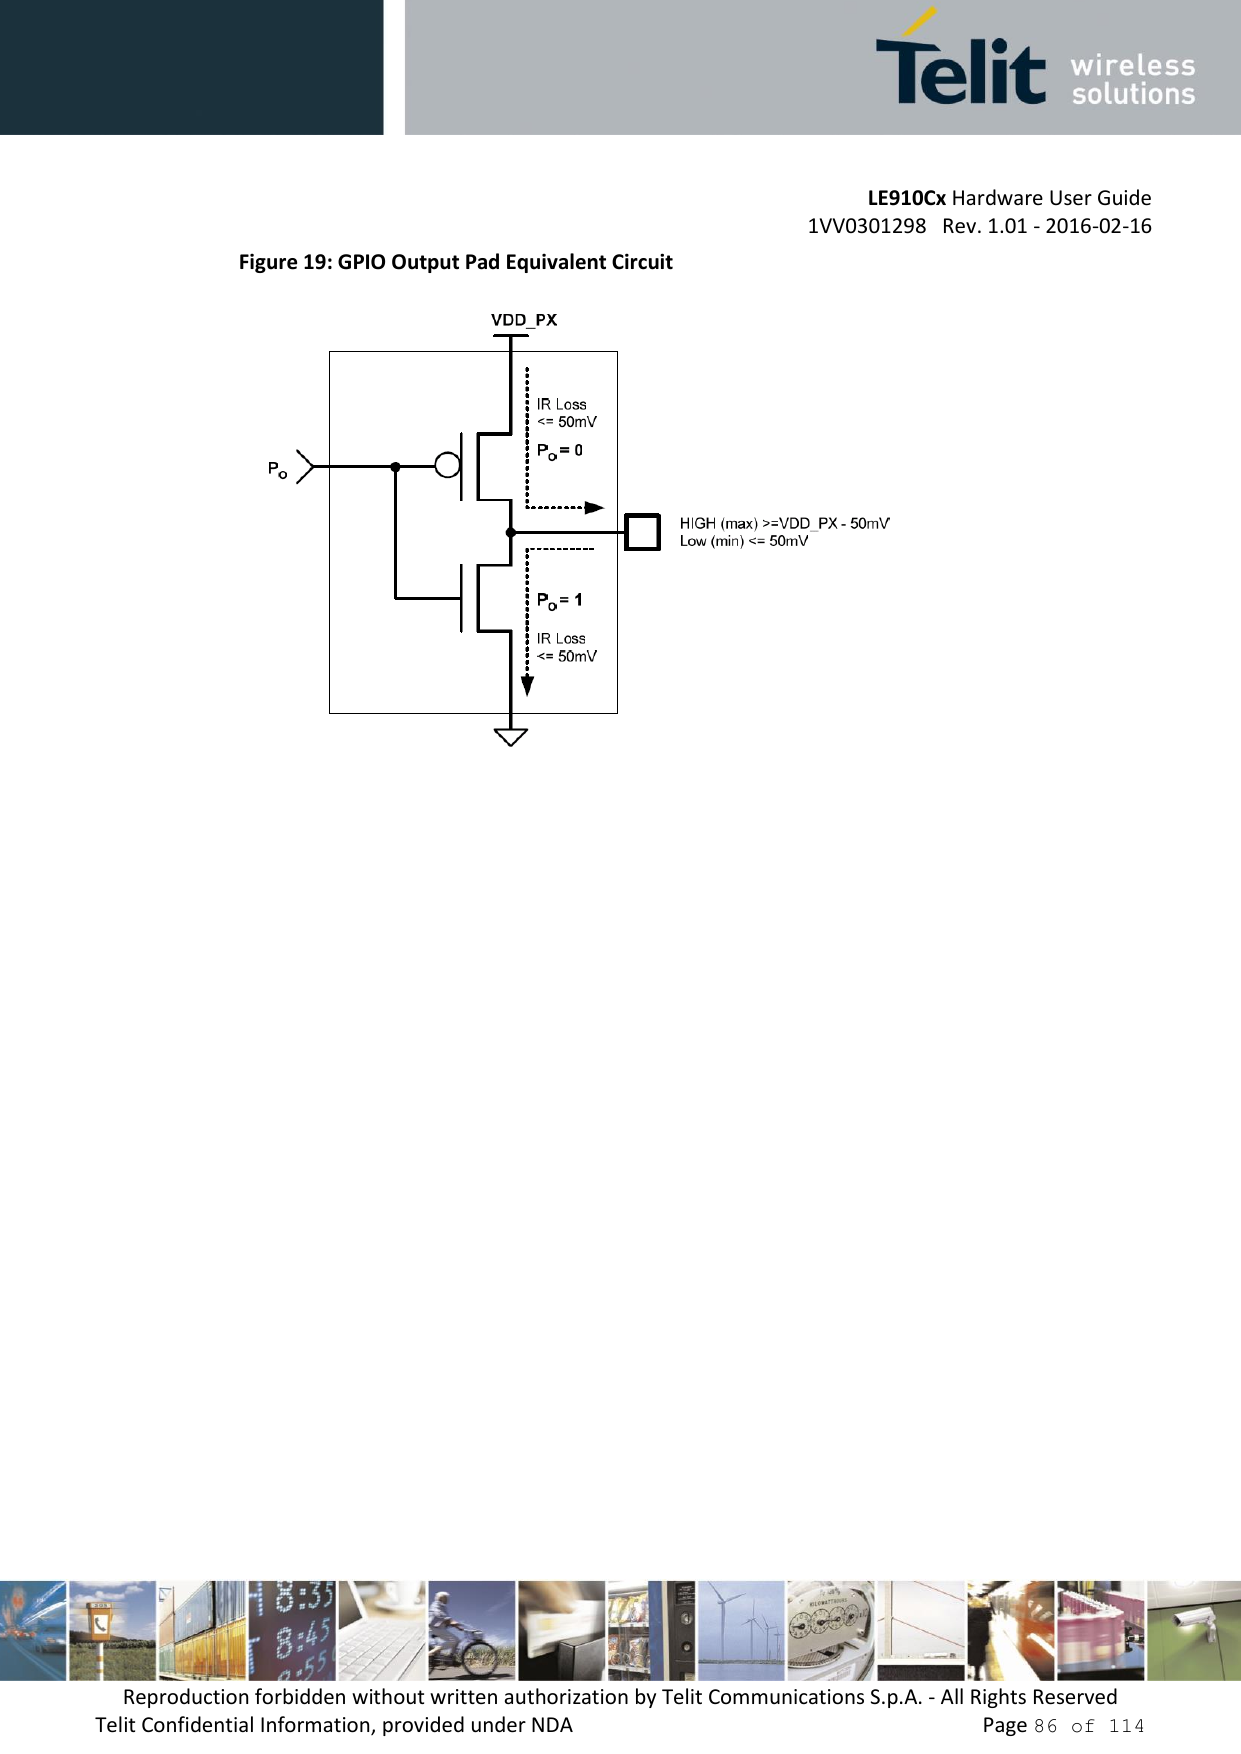         LE910Cx Hardware User Guide     1VV0301298   Rev. 1.01 - 2016-02-16 Reproduction forbidden without written authorization by Telit Communications S.p.A. - All Rights Reserved Telit Confidential Information, provided under NDA                 Page 86 of 114 Figure 19: GPIO Output Pad Equivalent Circuit  